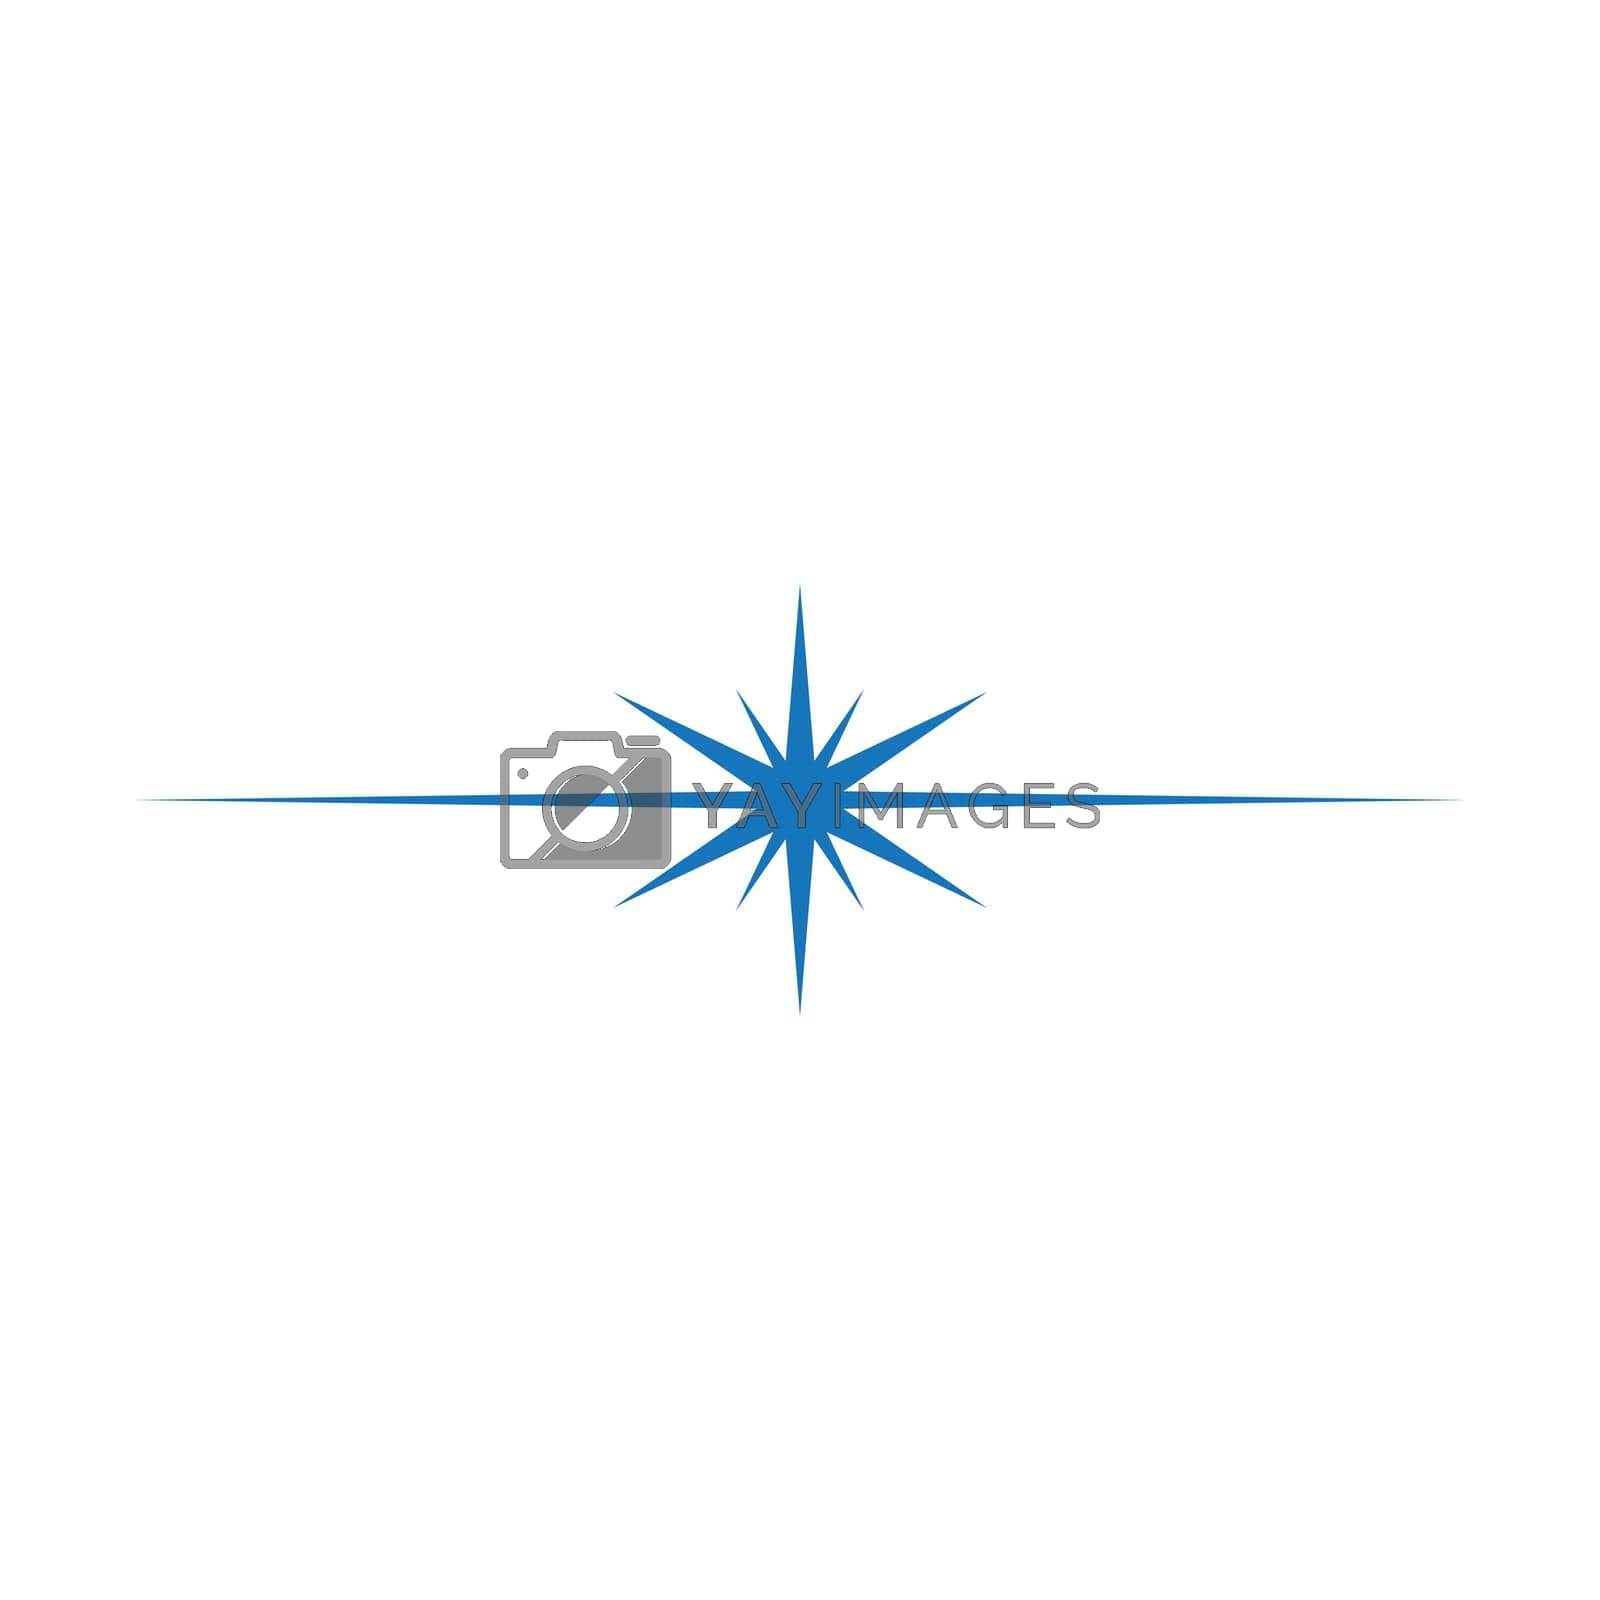 Royalty free image of Compass illustration vector design by awk